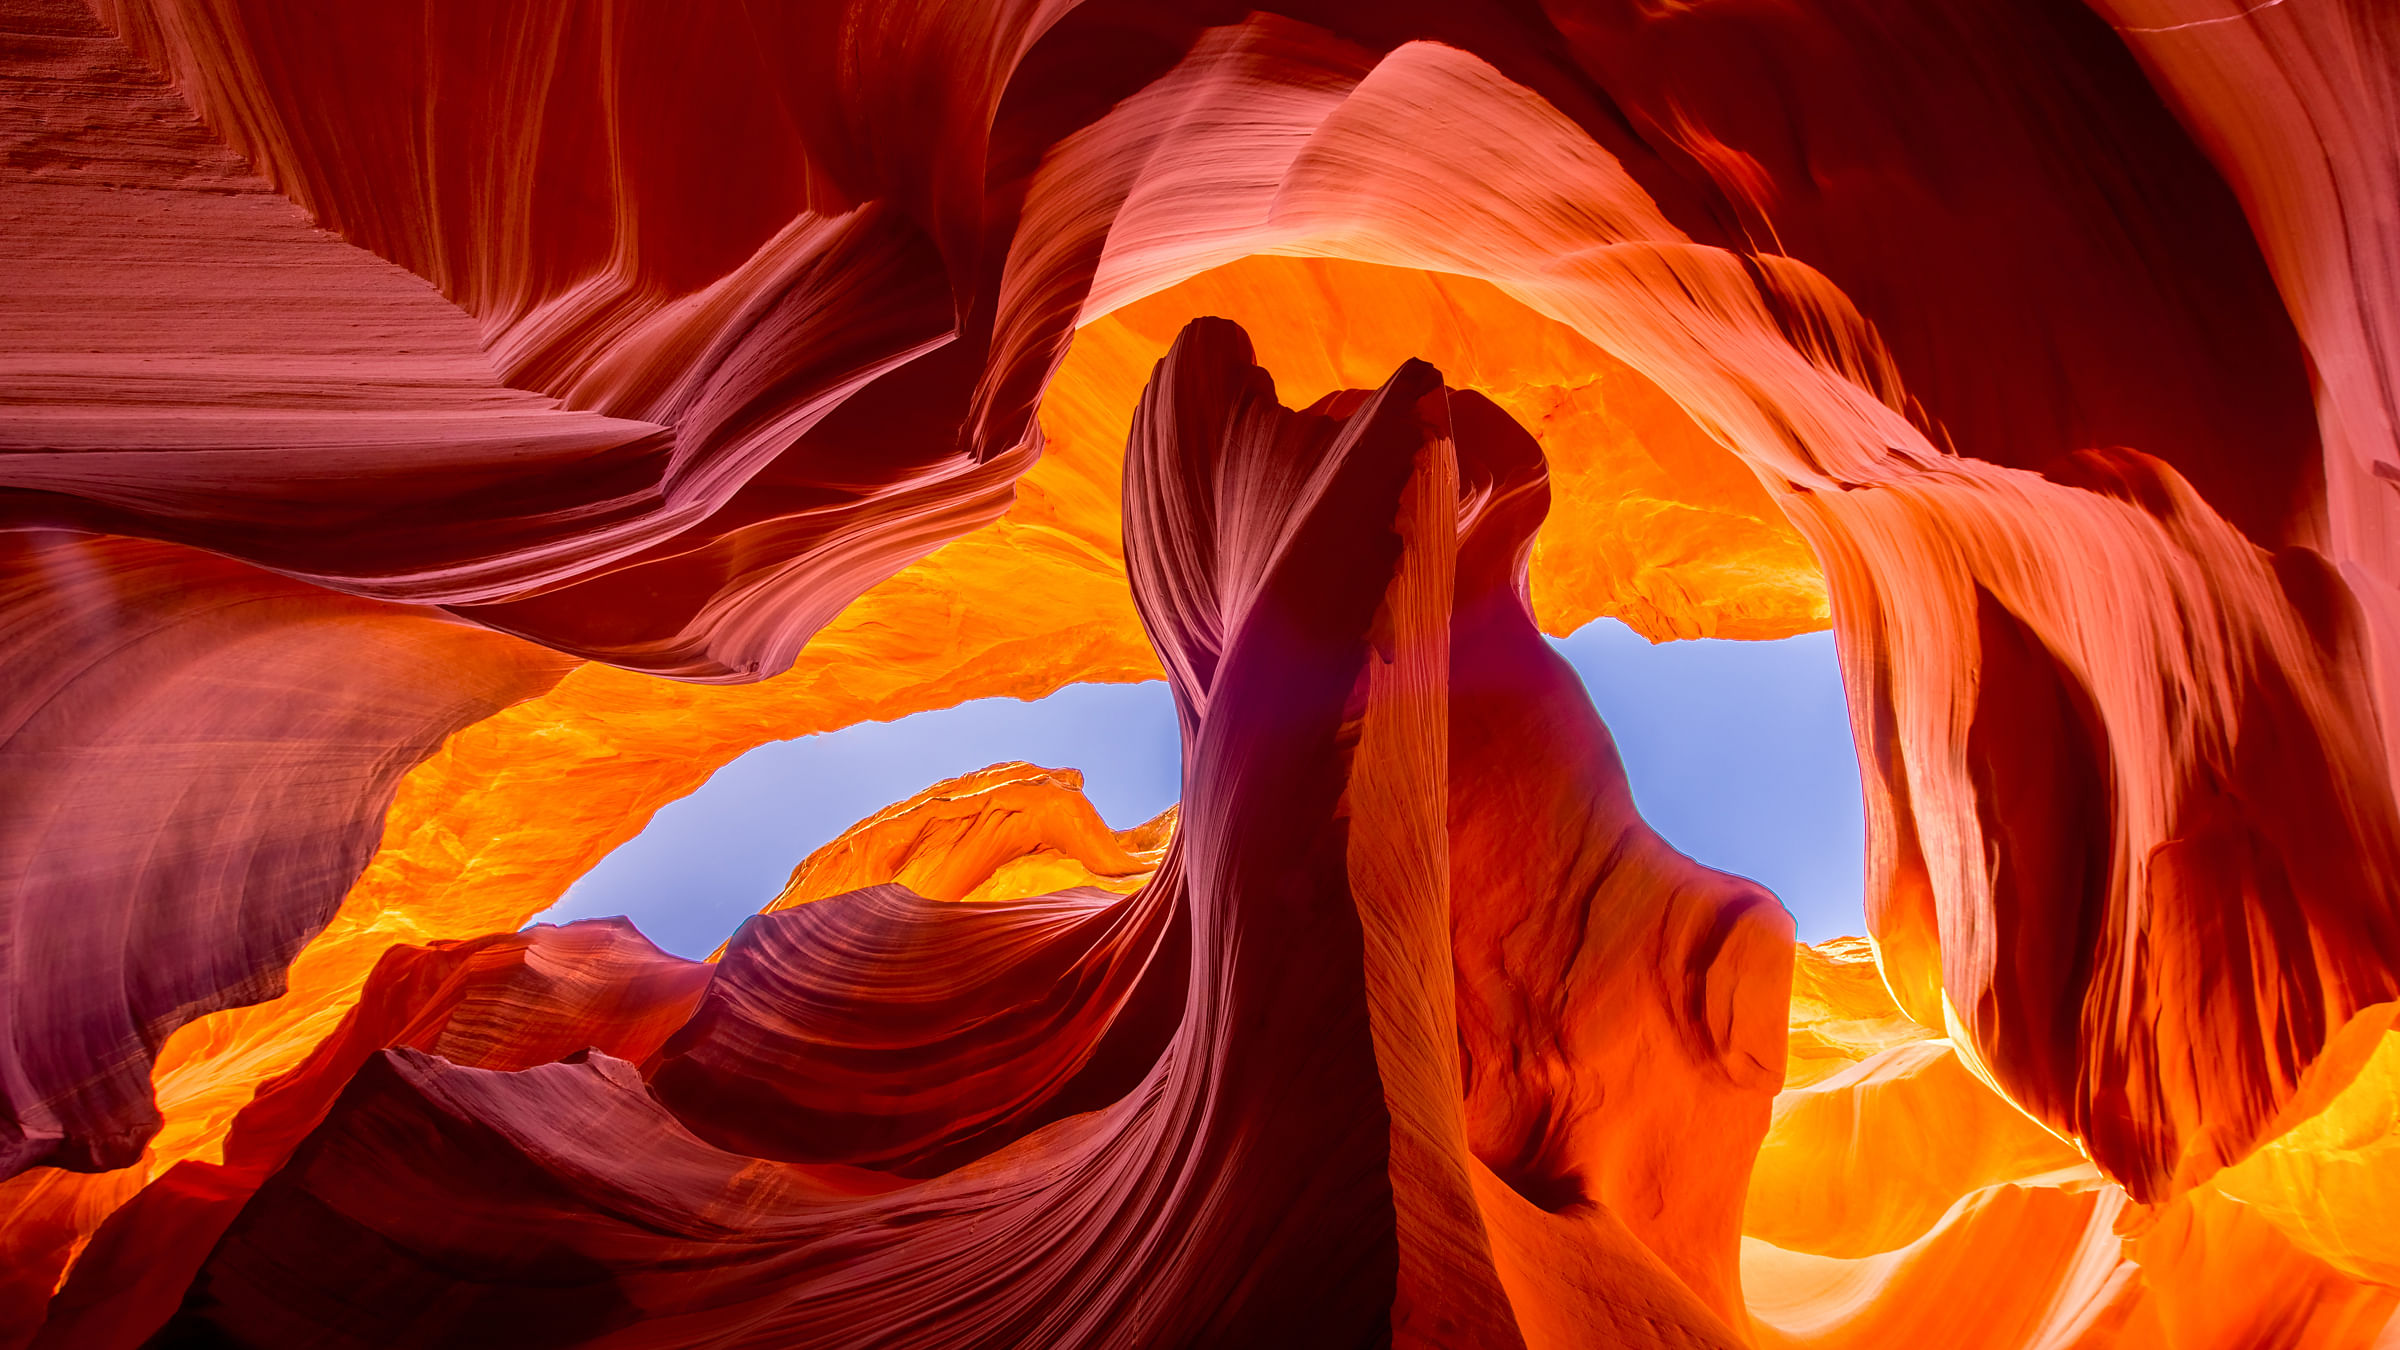 antelope canyon and horseshoe bend tour from phoenix